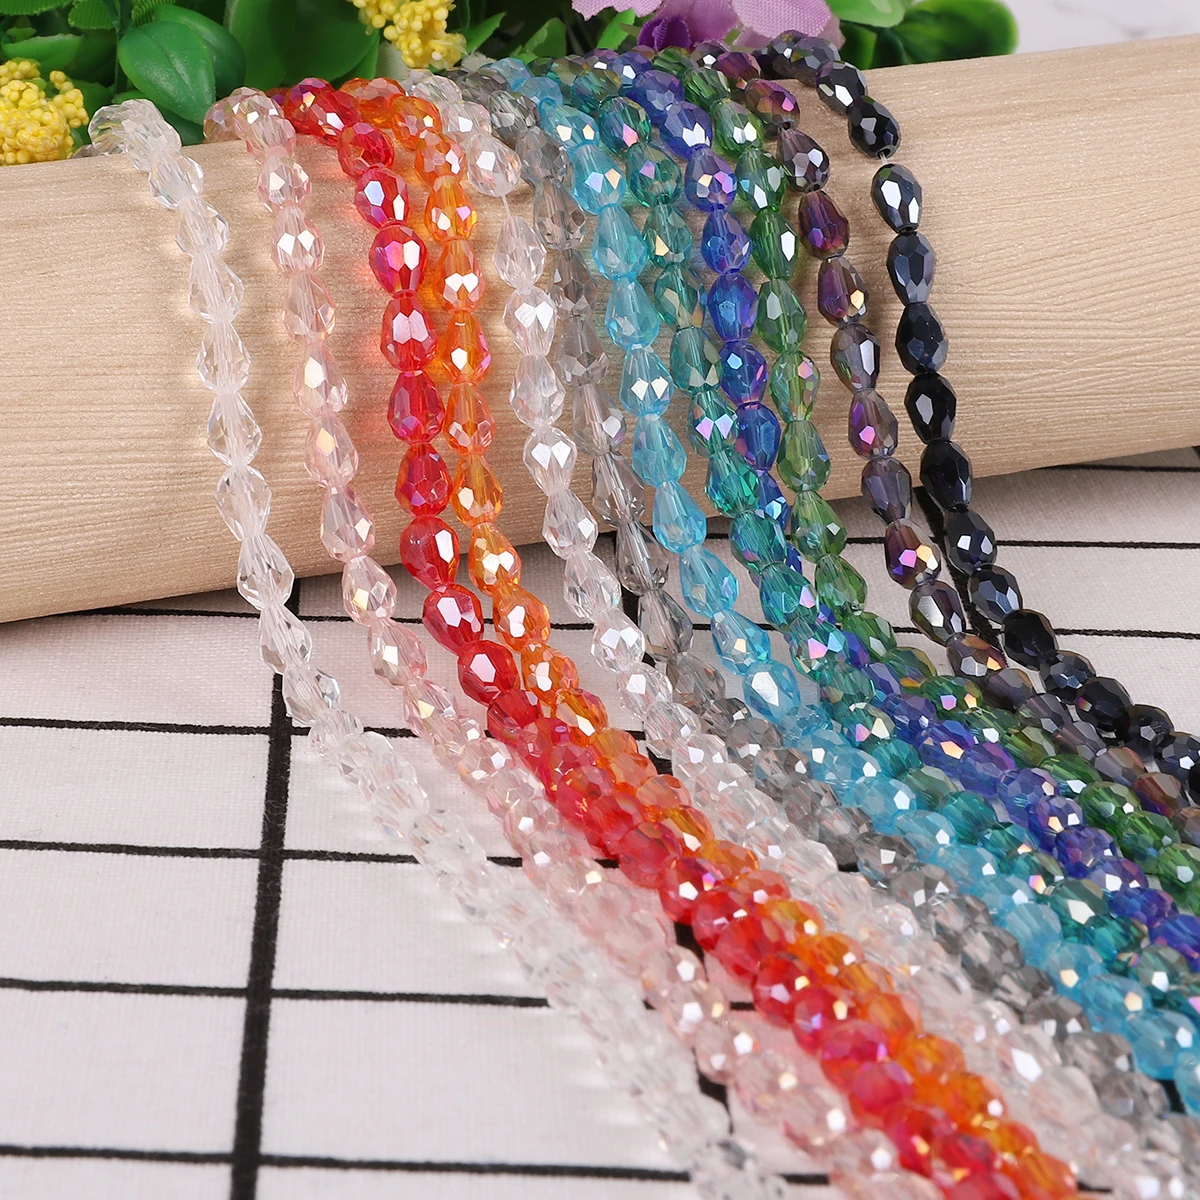 Teardrop Beads Glass Crystal Faceted Loose Spacer 3x5 4x6 5x7mm Jewelry Making 